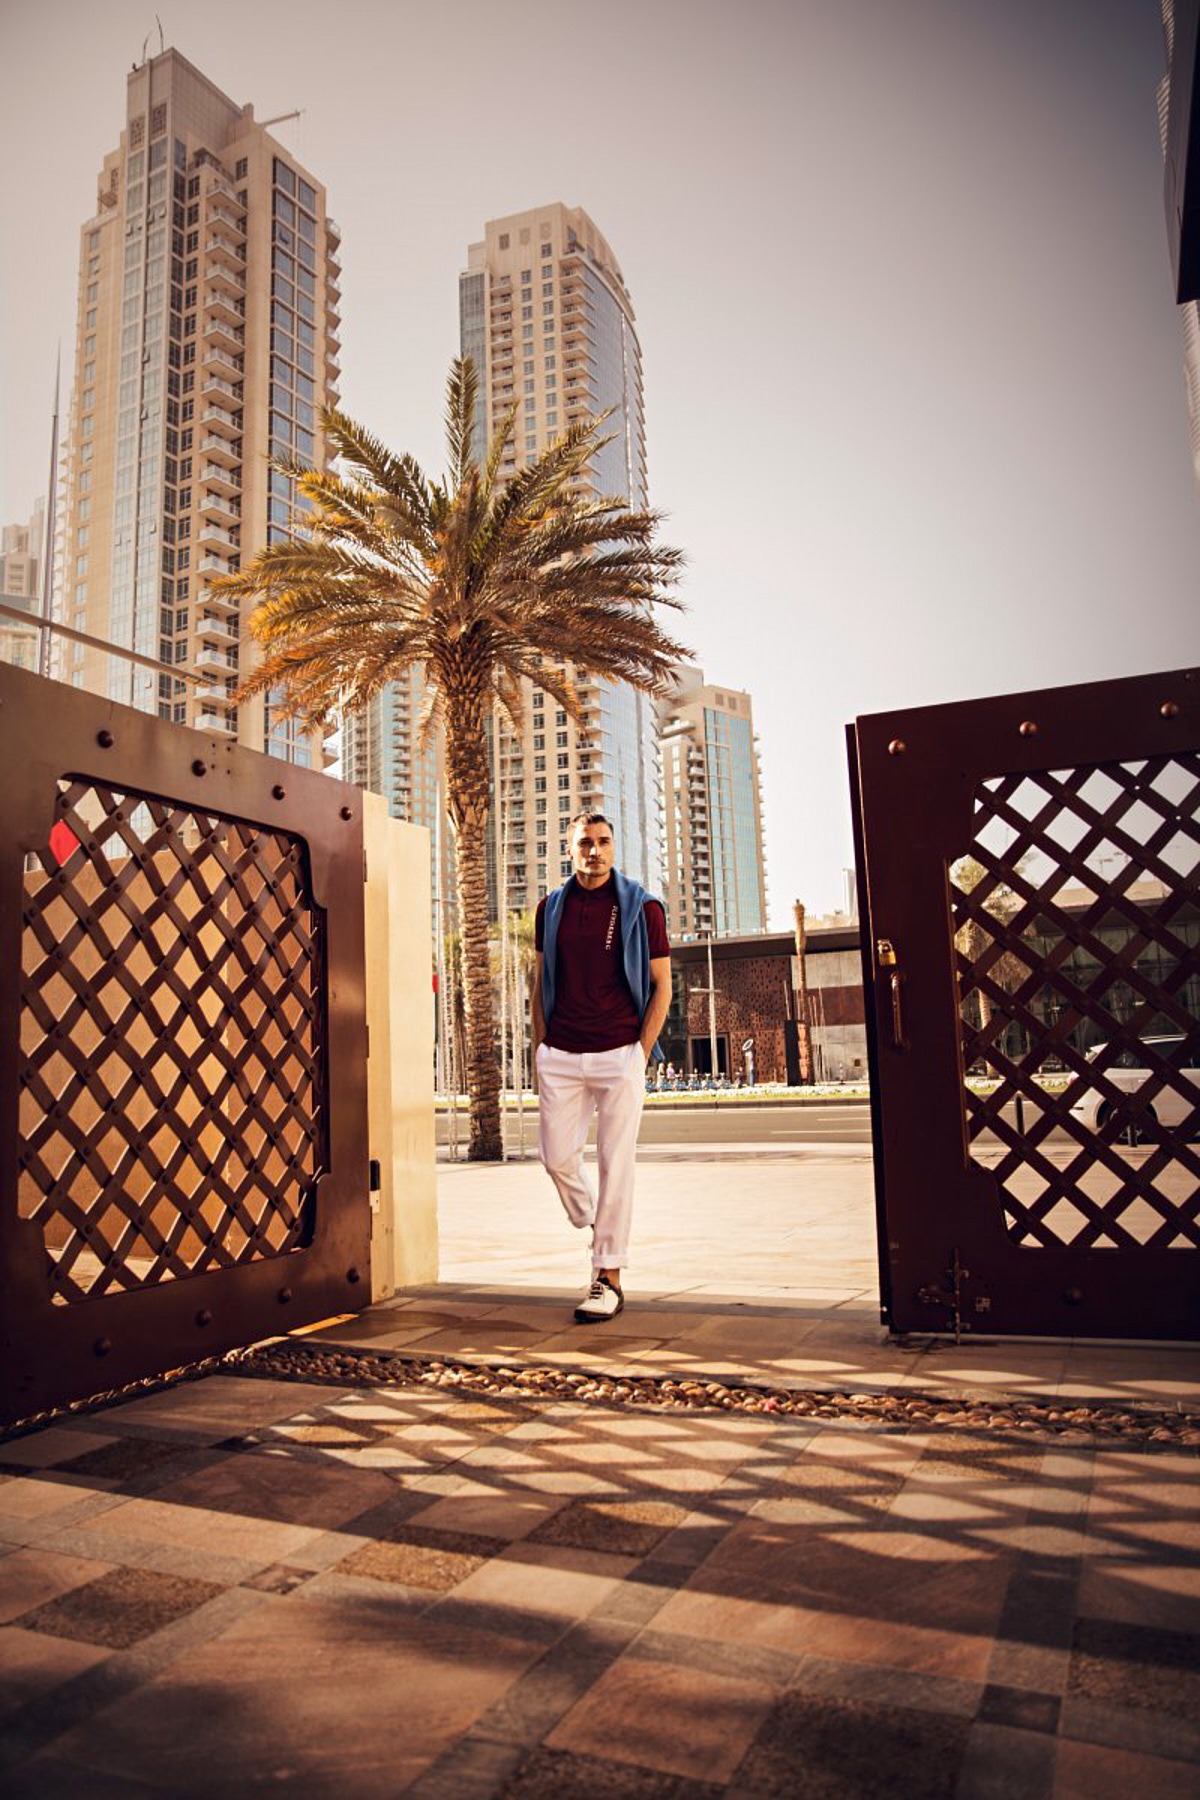 mclaren advertorial dubai (7 images) by Mike Meyer Photography